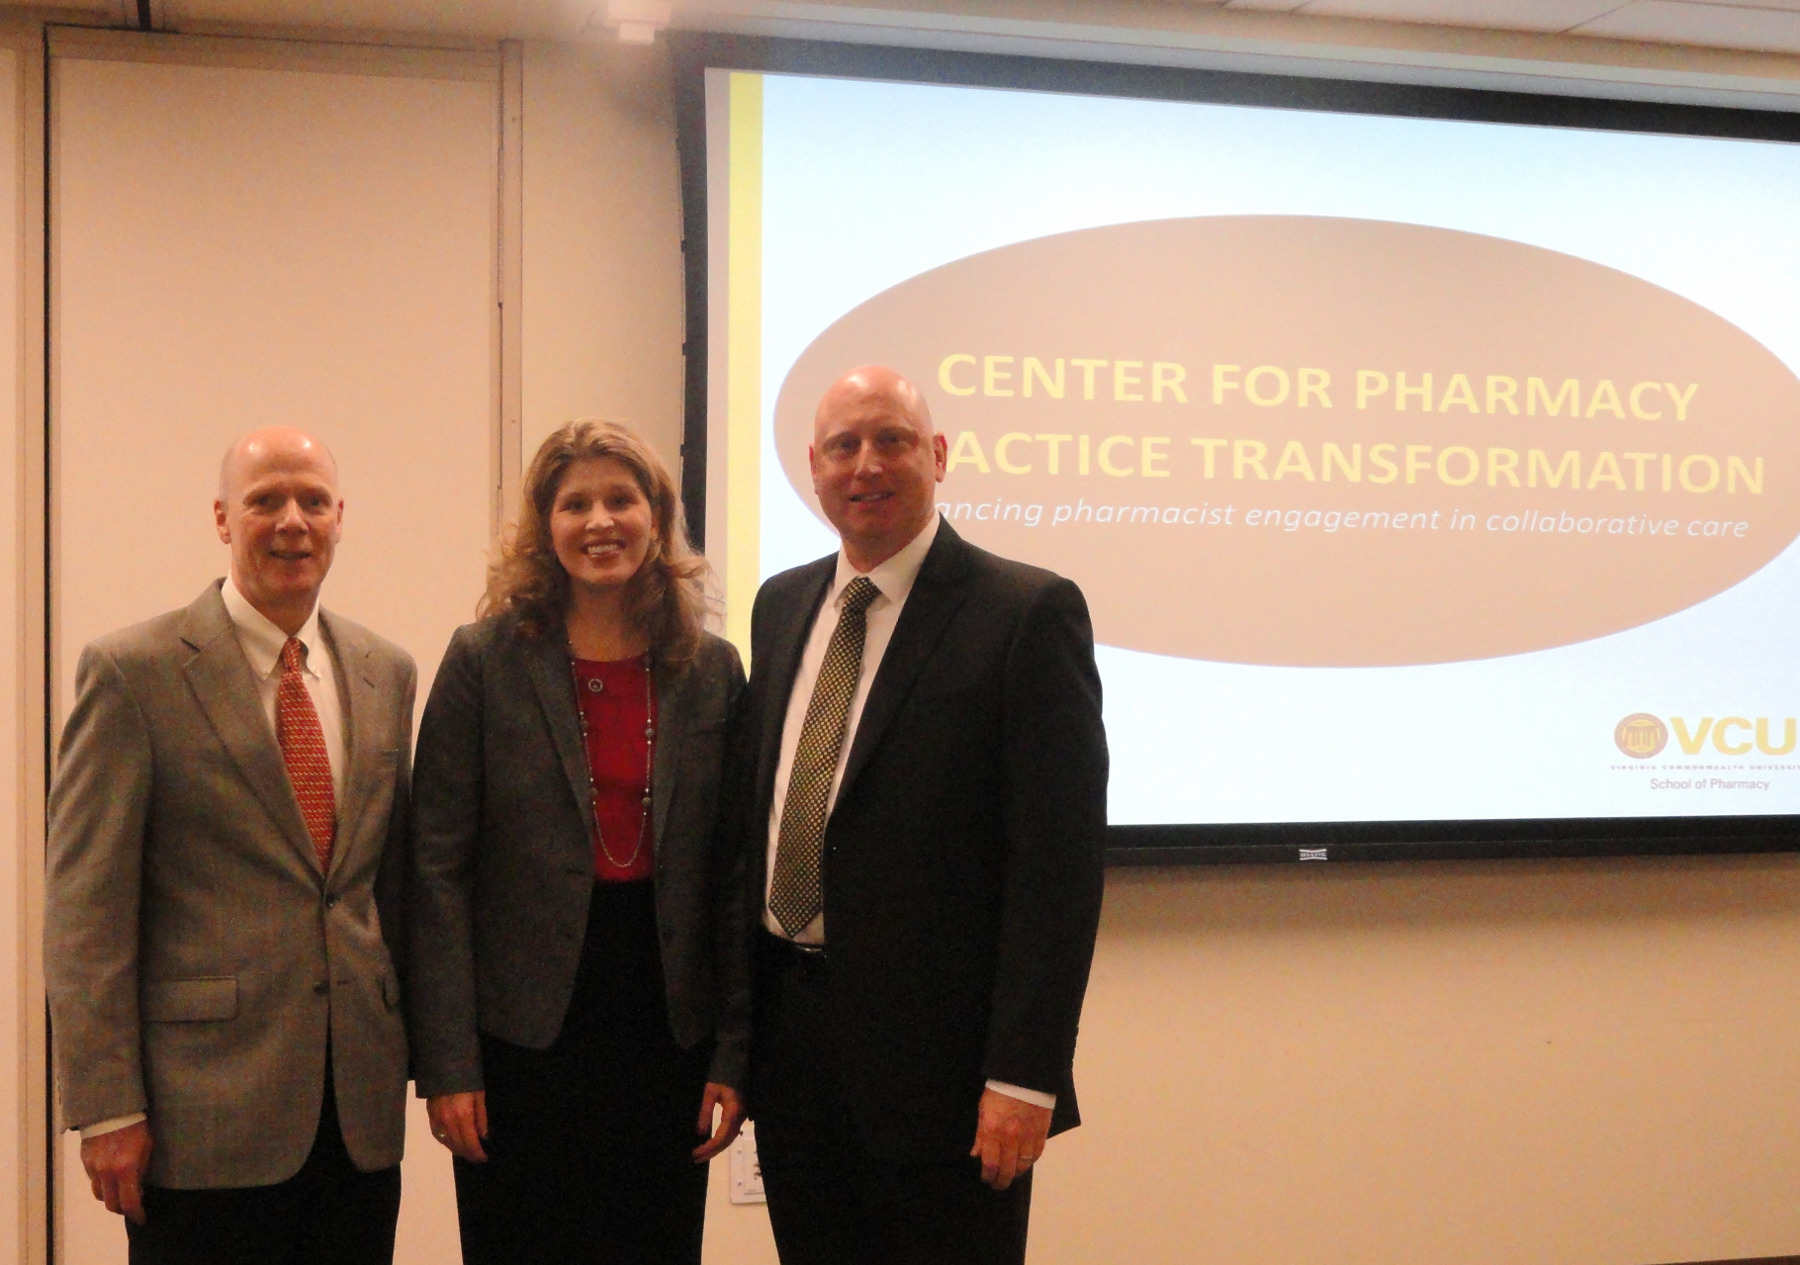 Three VCU faculty members standing in front of a PowerPoint slide that reads "Center for Pharmacy Practice Innovation"